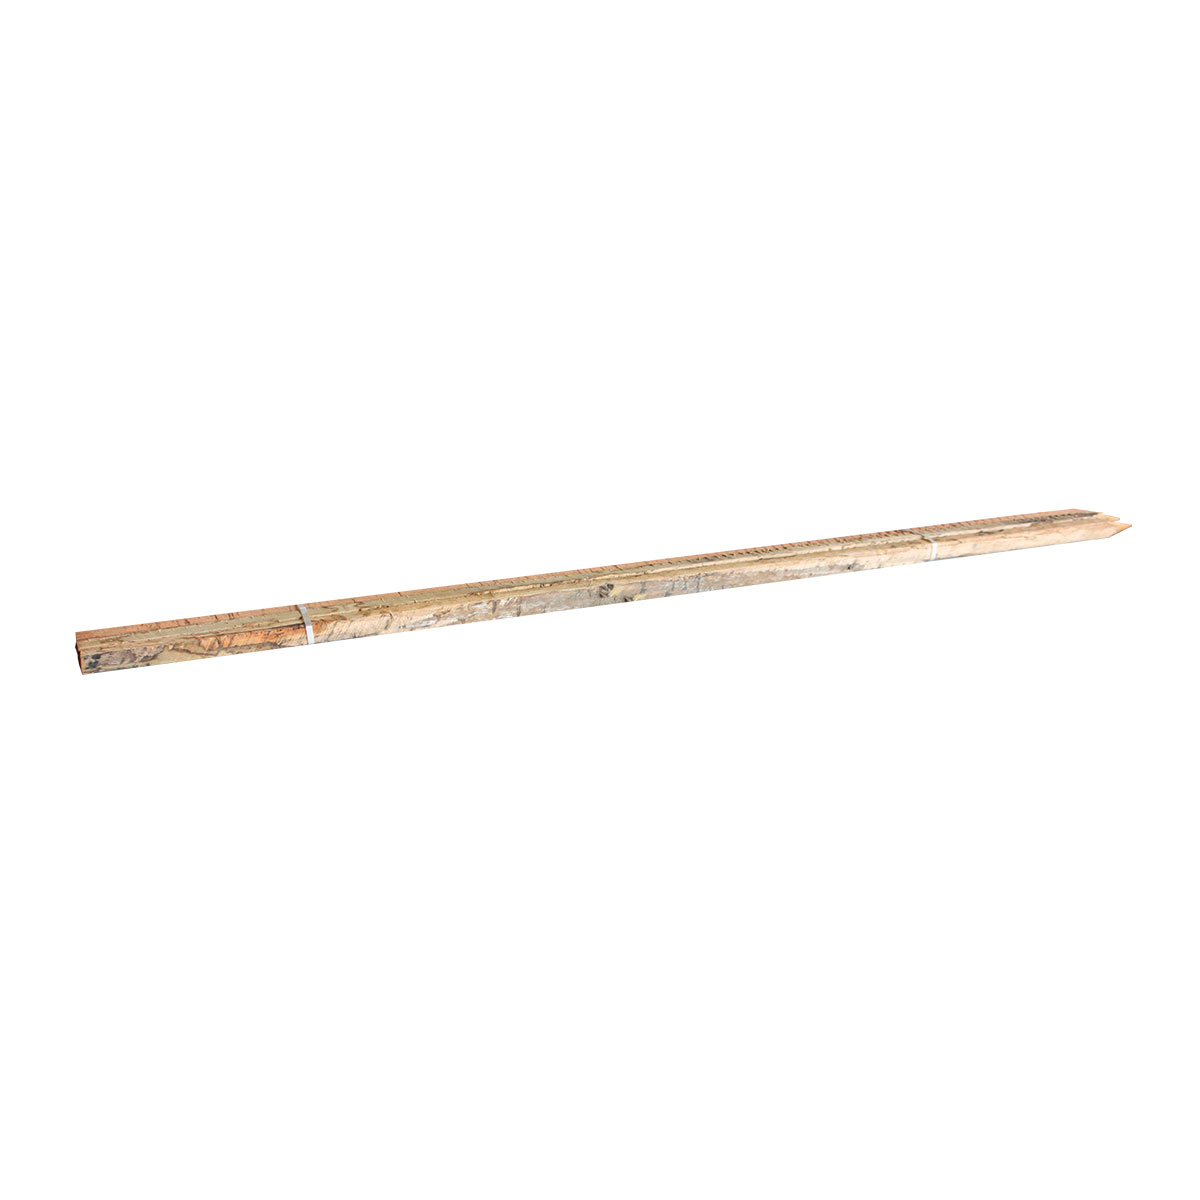 Hardwood Stakes 38 x 38 x 2100mm - 3 Pack